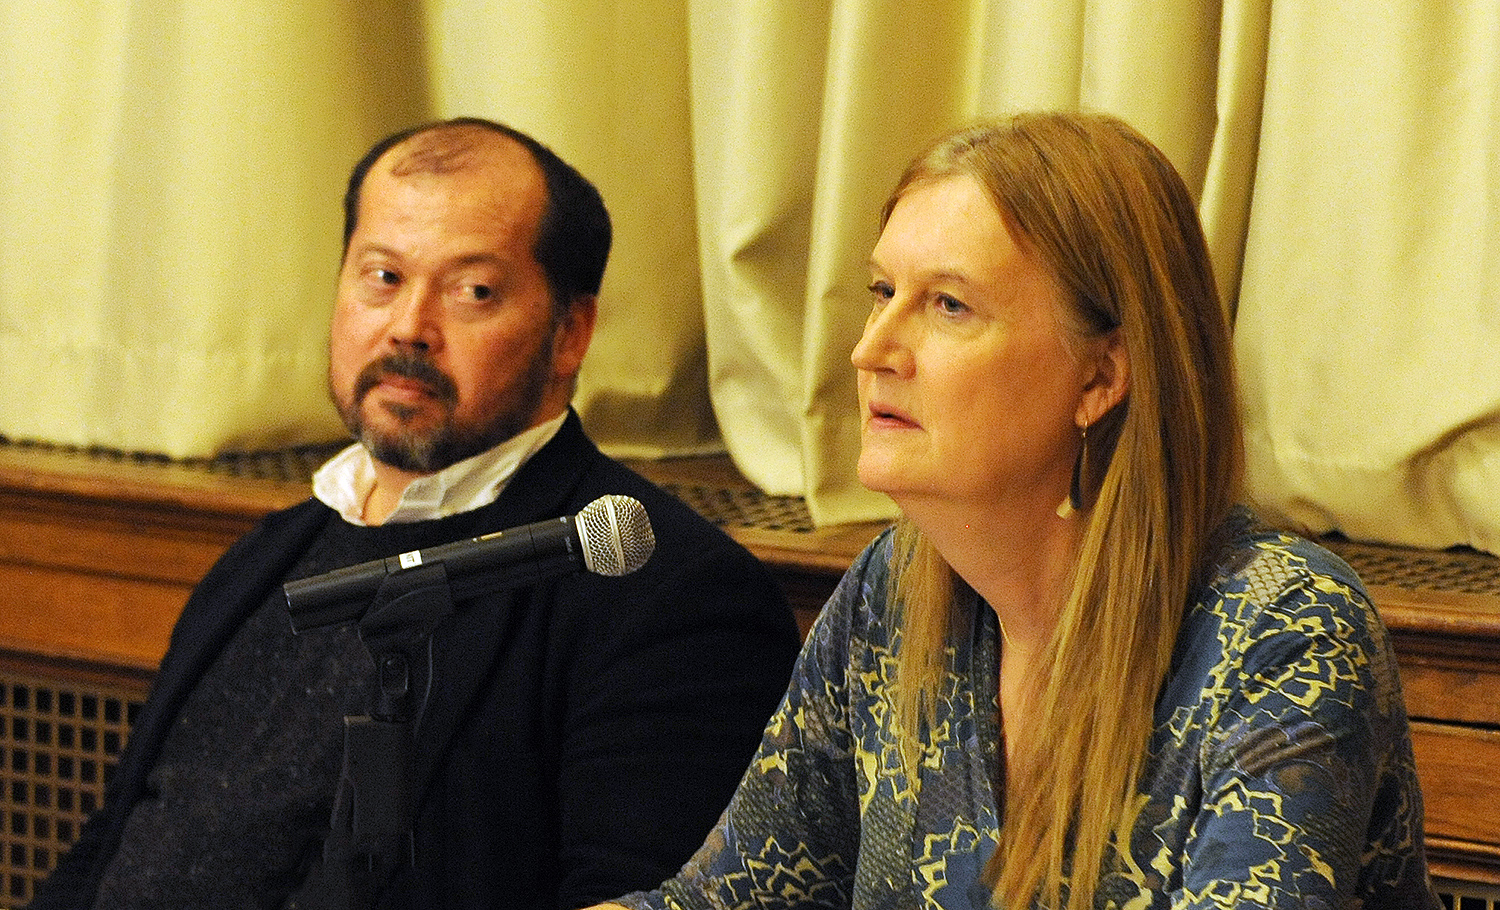 Wesleyan alumni Alexander Chee '89 and Jennifer Boylan ’80 read from their recent work, discussed queer lives and storytelling, and shared their own experiences as LGBT writers at Wesleyan.